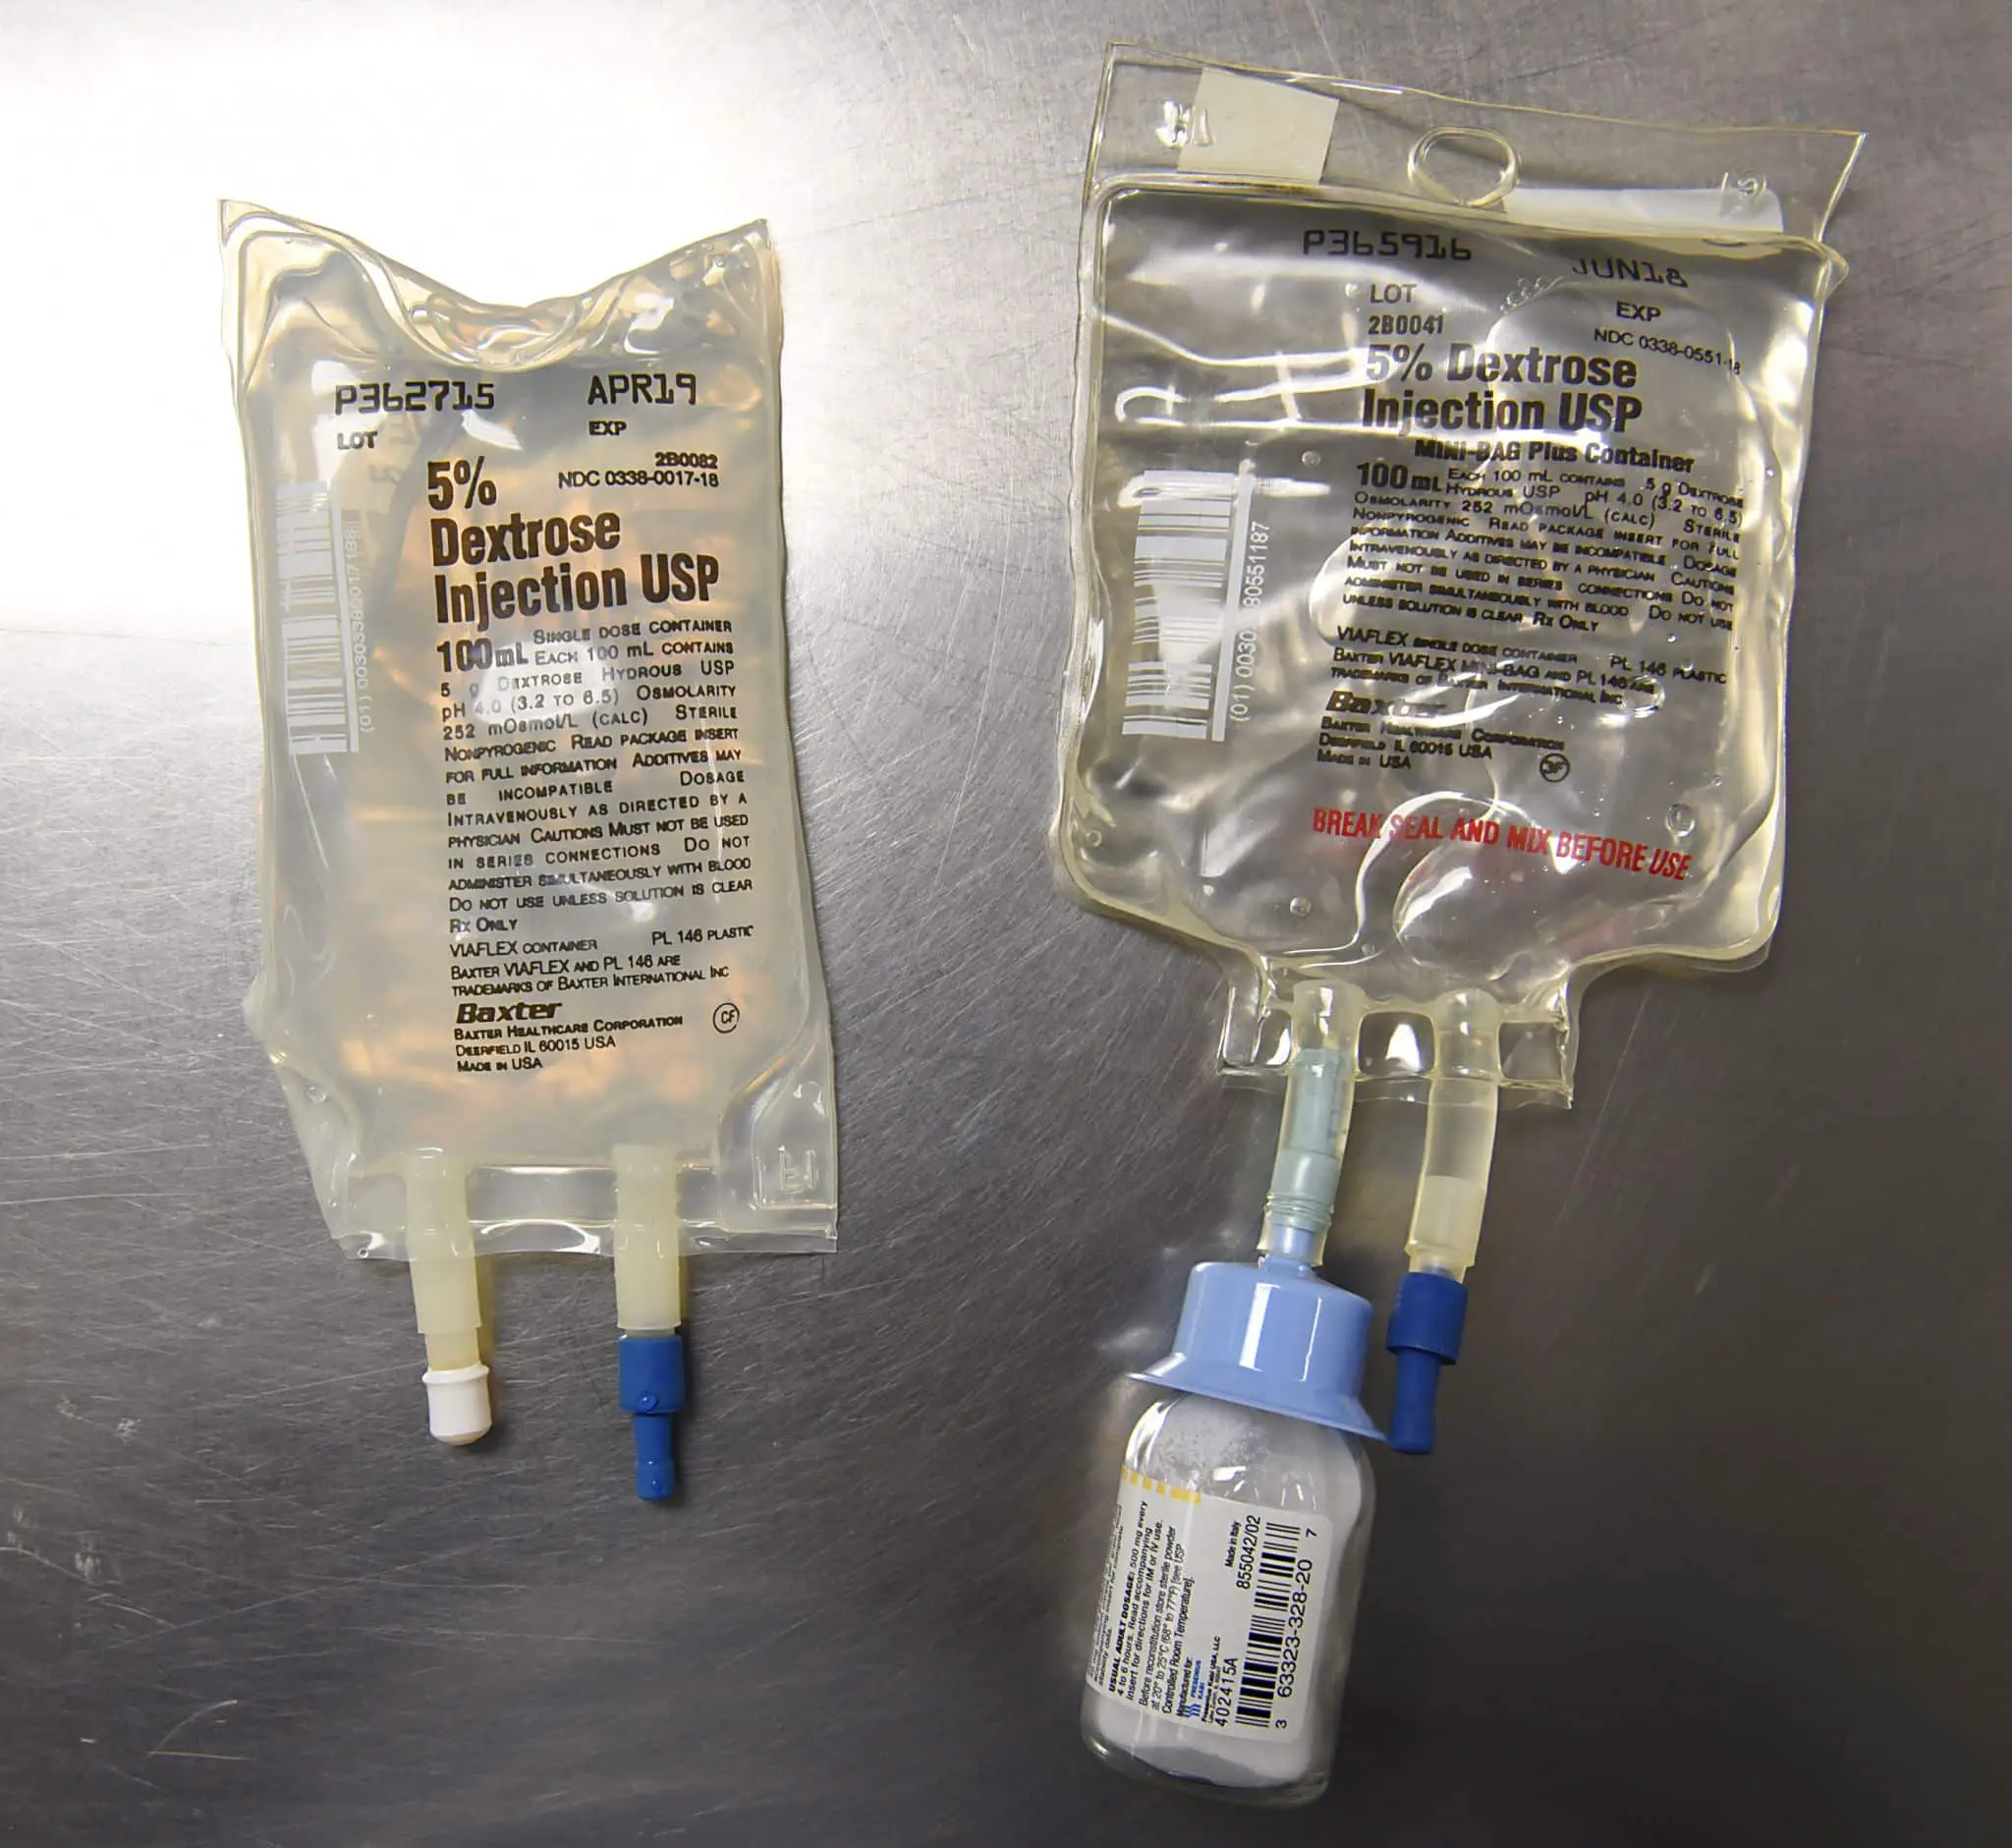 Hospitals nationwide face shortage of IV bags